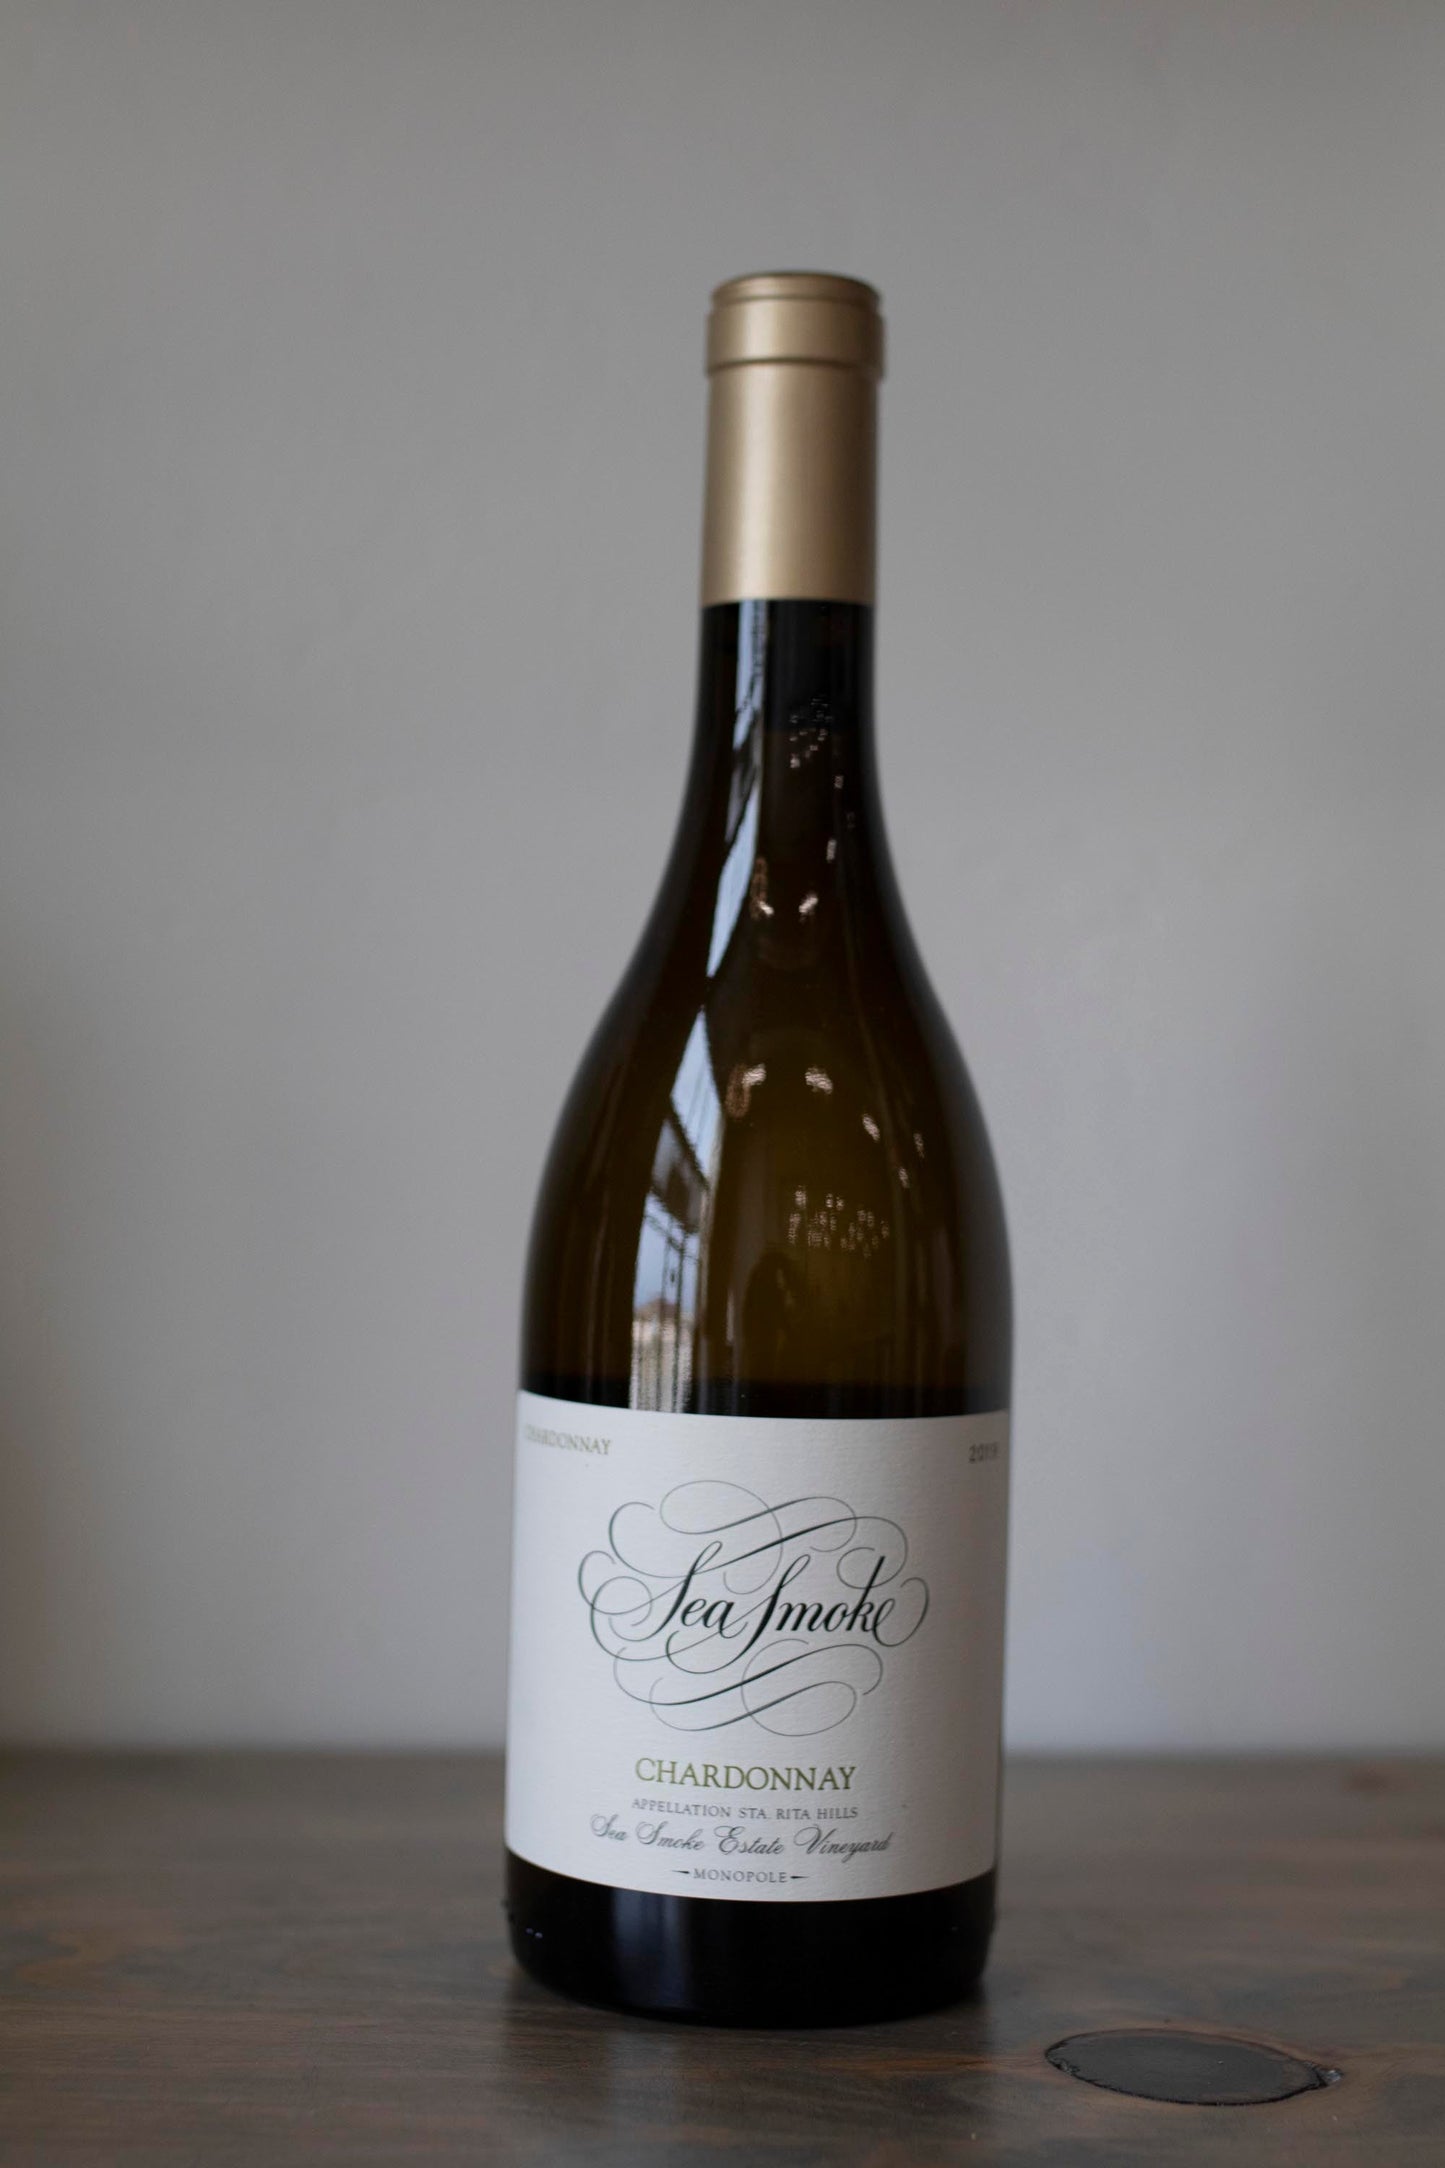 Bottle of Sea Smoke Chardonnay 2019 found at Vine & Board in 3809 NW 166th St Suite 1, Edmond, OK 73012